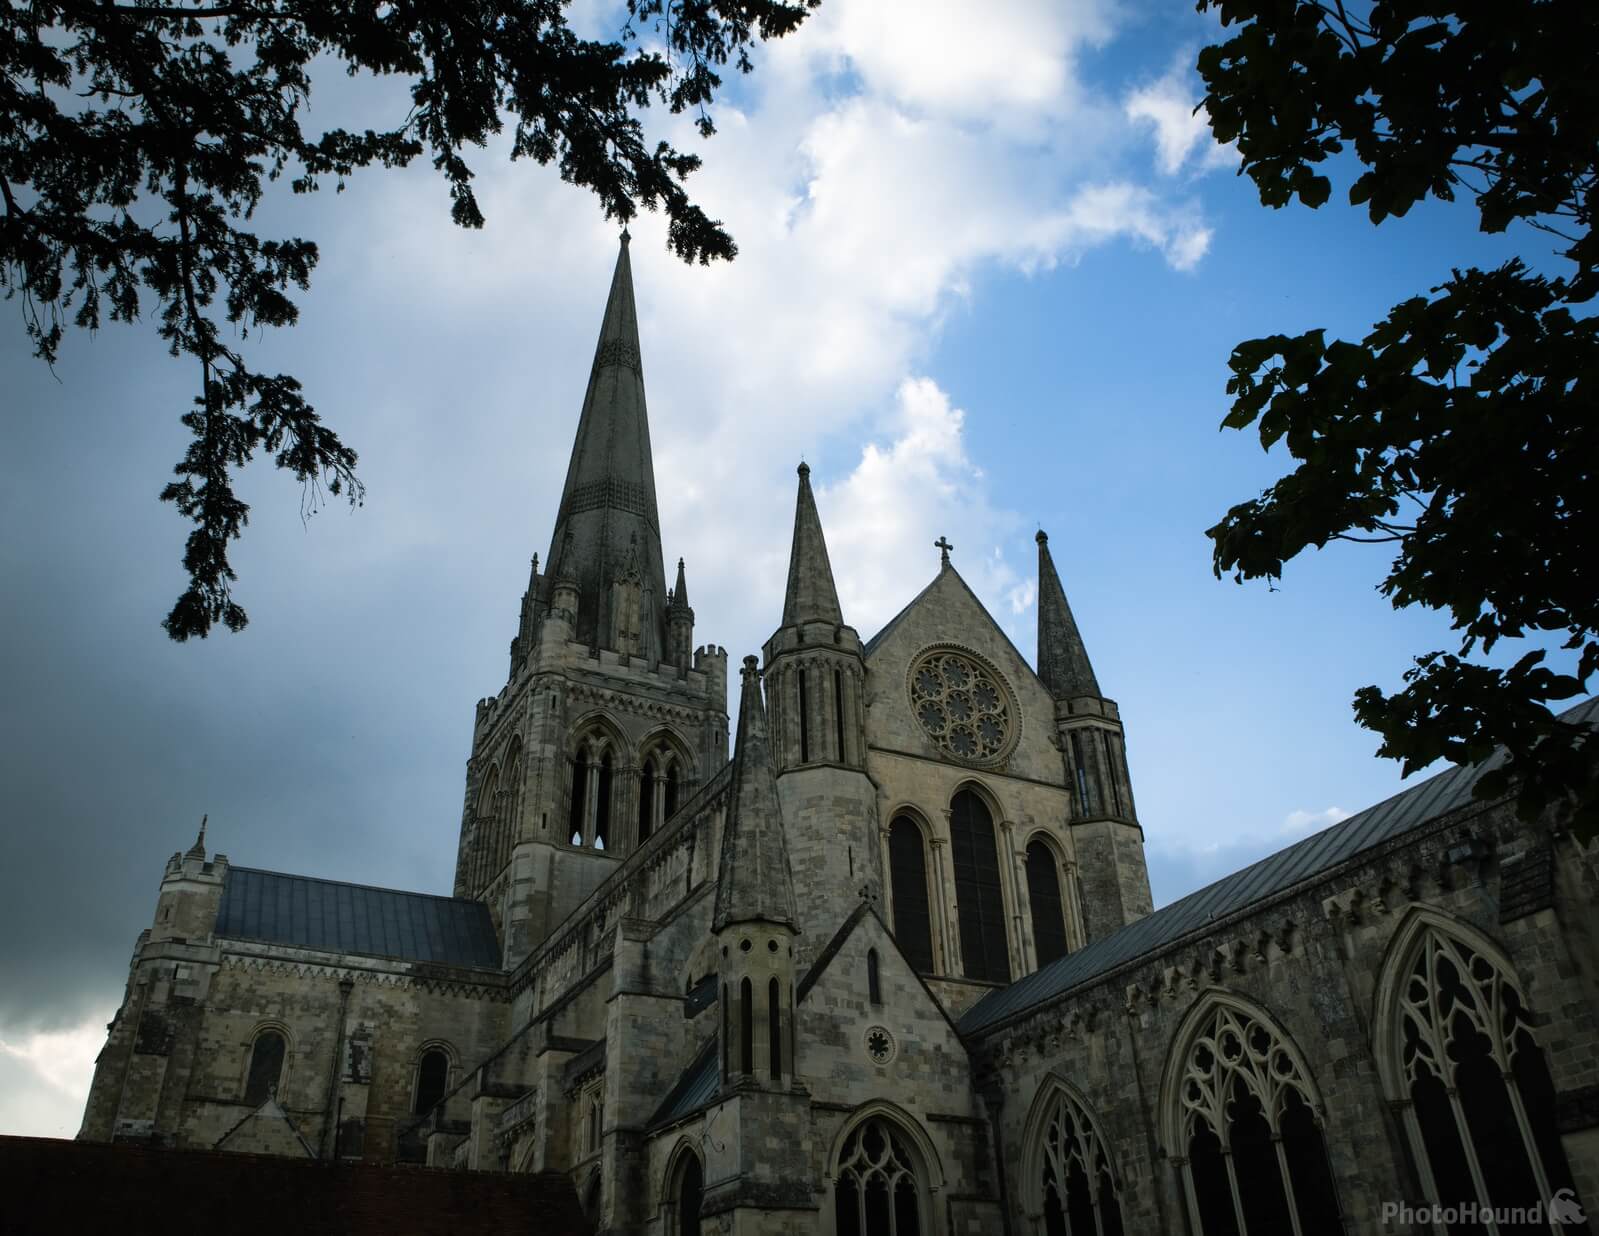 Image of Chichester Cathedral by Richard Joiner